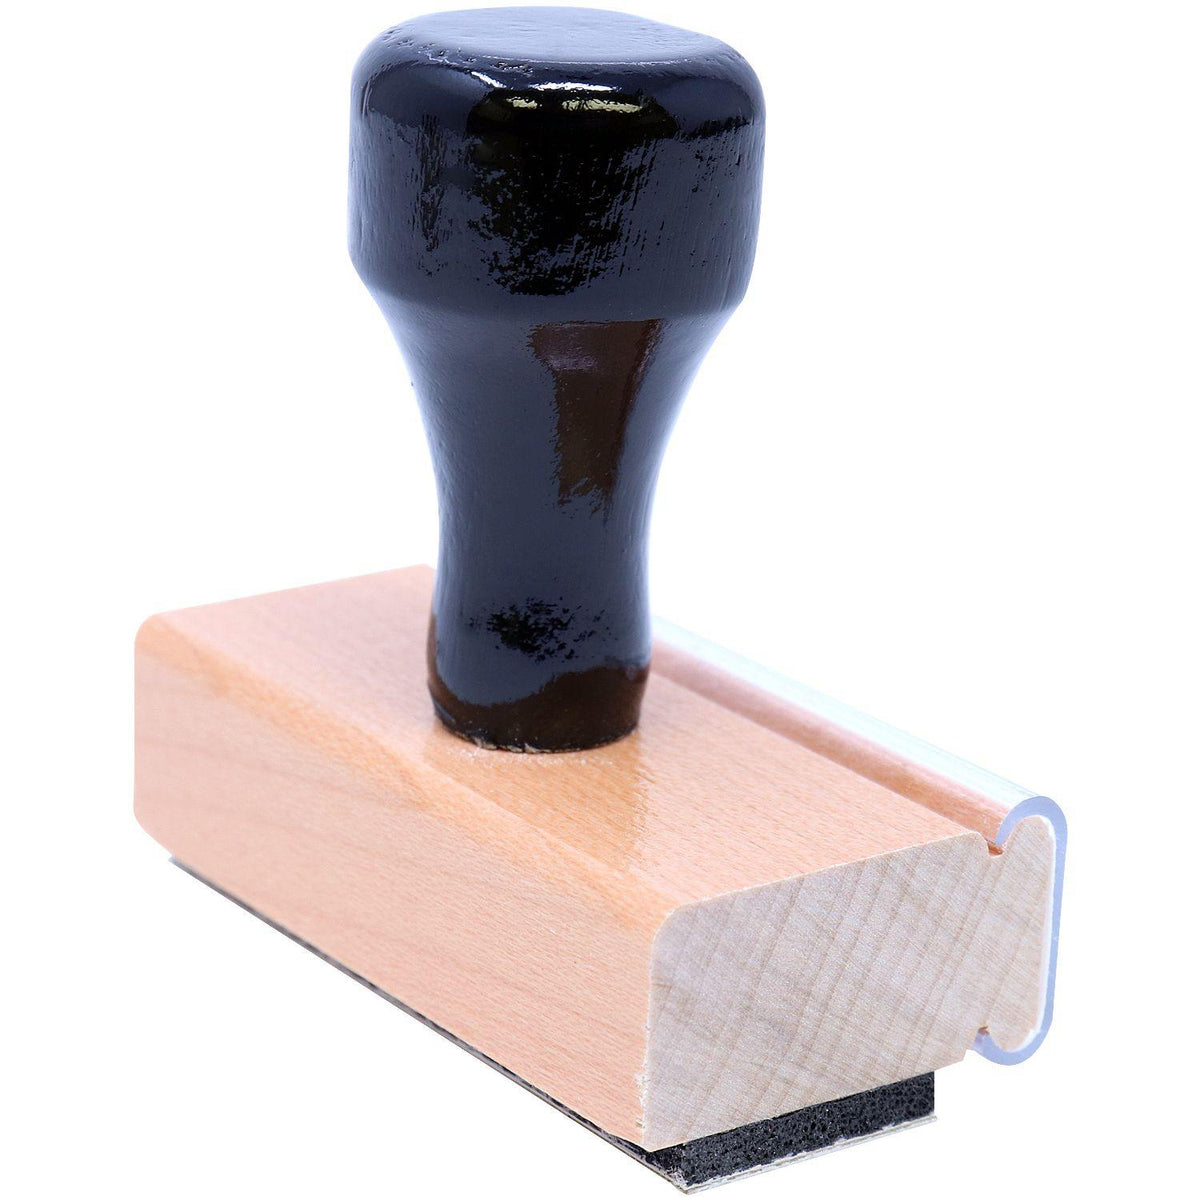 Promoted Rubber Stamp - Engineer Seal Stamps - Brand_Acorn, Impression Size_Small, Stamp Type_Regular Stamp, Type of Use_Business, Type of Use_General, Type of Use_Office, Type of Use_Professional